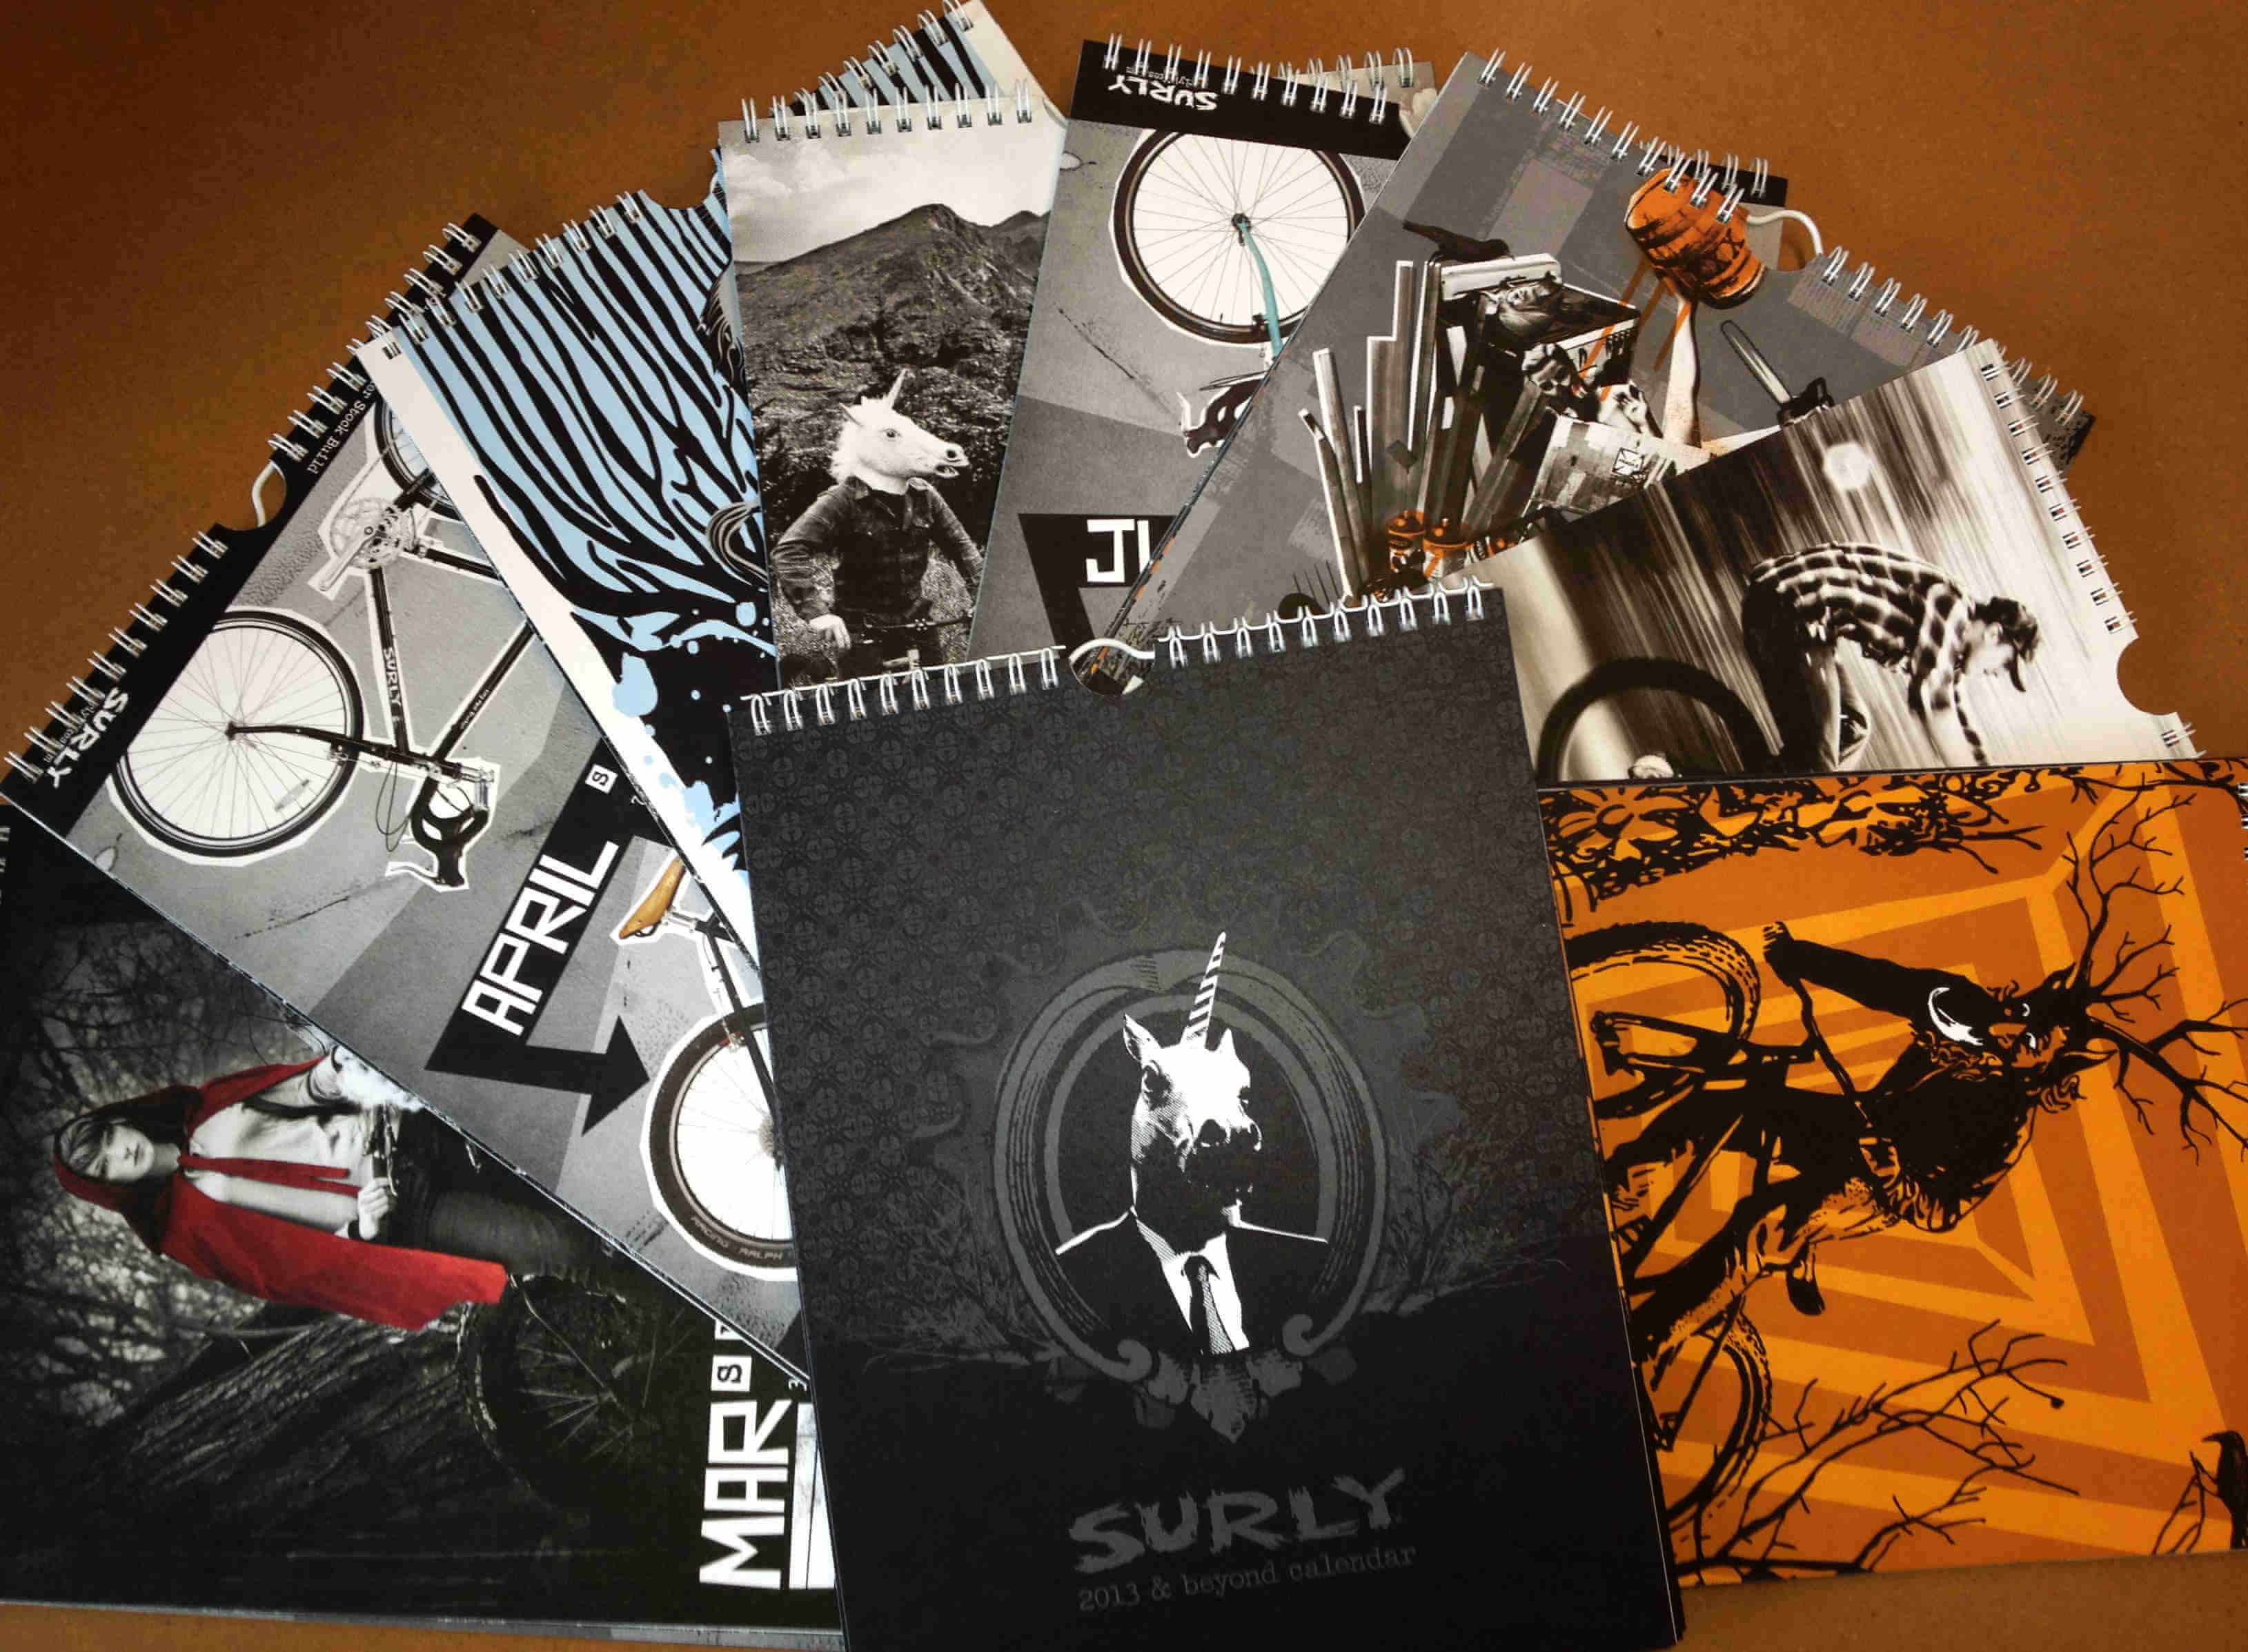 Downward view of 2013 Surly Bikes calendars, opened to different pages, laying on top of each other, on a brown surface